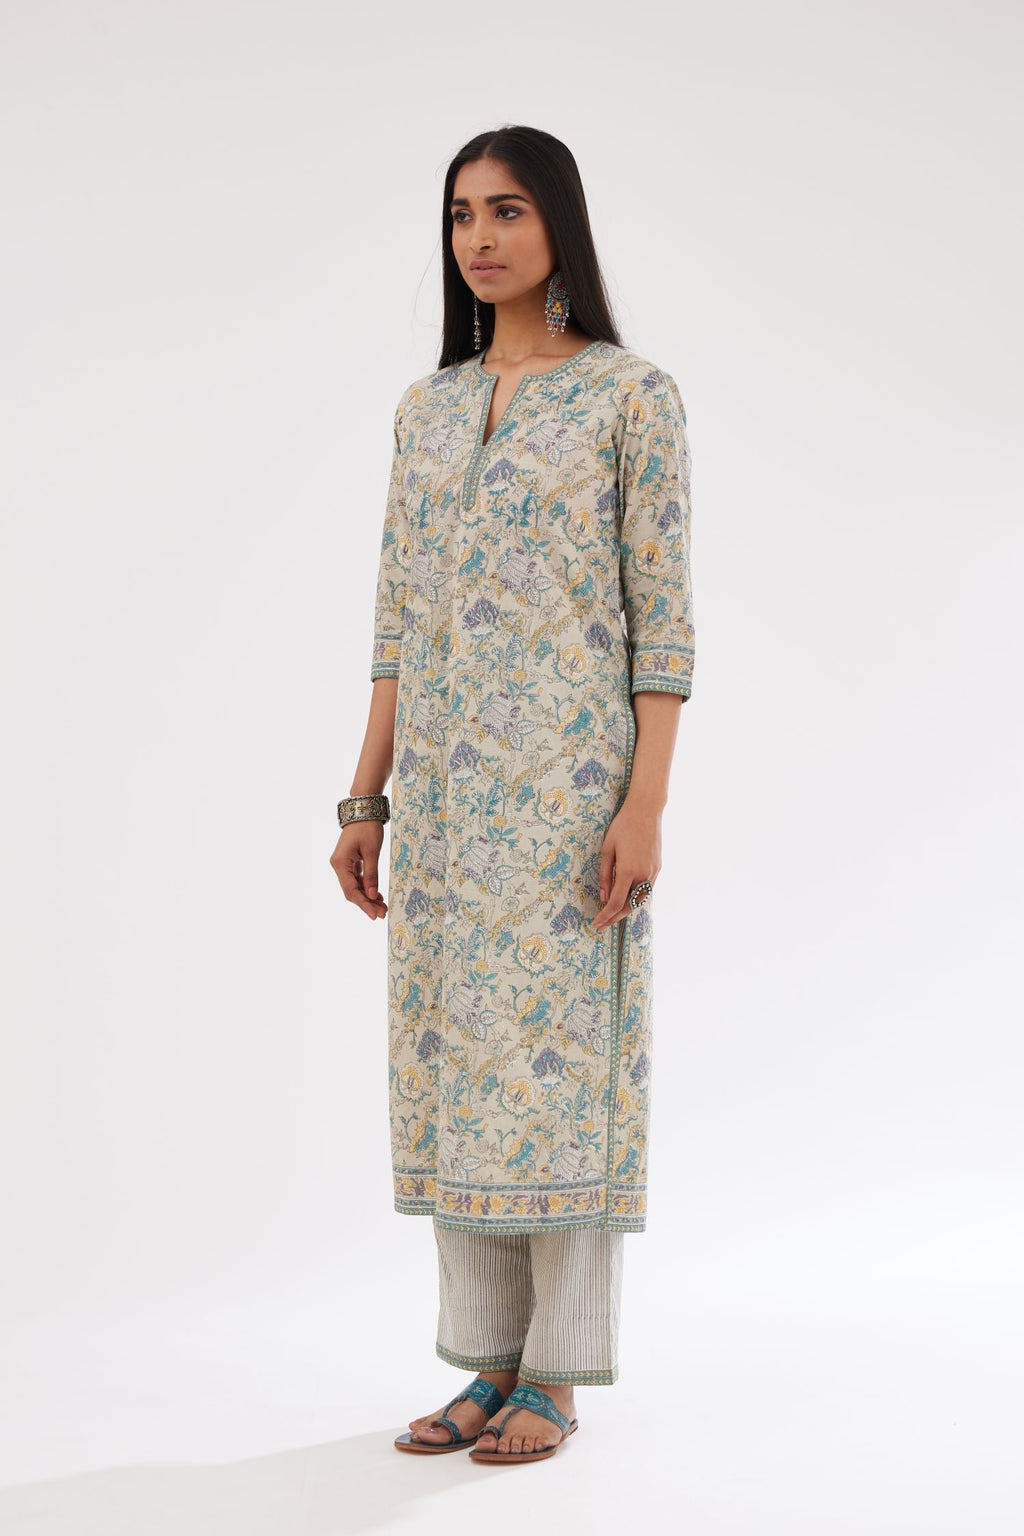 Grey and blue straight kurta with all-over chintz block print & side slits.